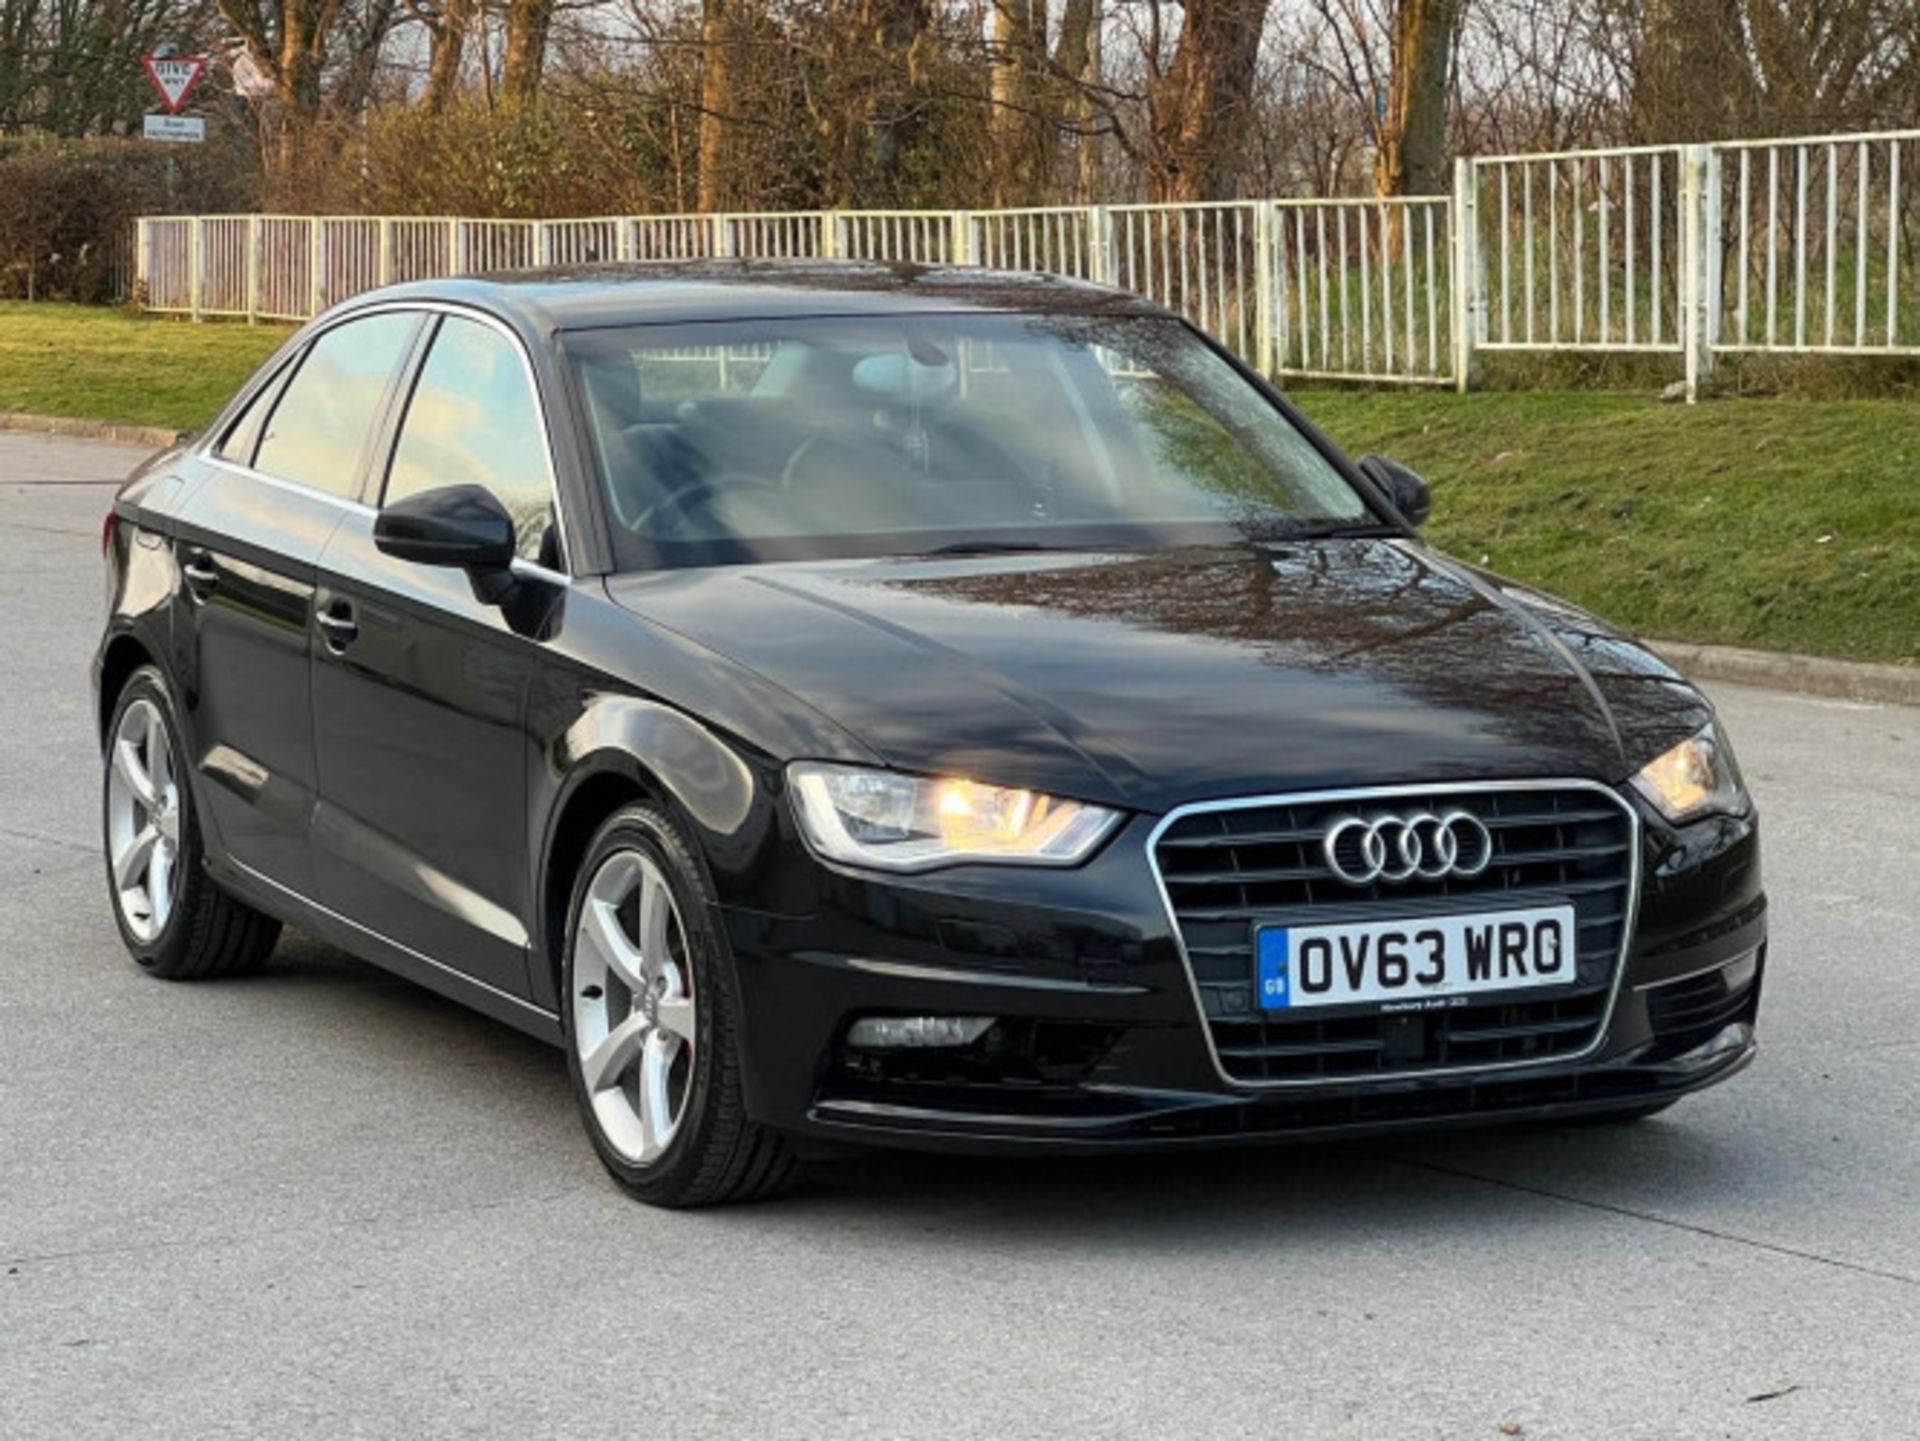 AUDI A3 2.0TDI SPORTBACK - STYLE, PERFORMANCE, AND COMFORT COMBINED >>--NO VAT ON HAMMER--<< - Image 203 of 216